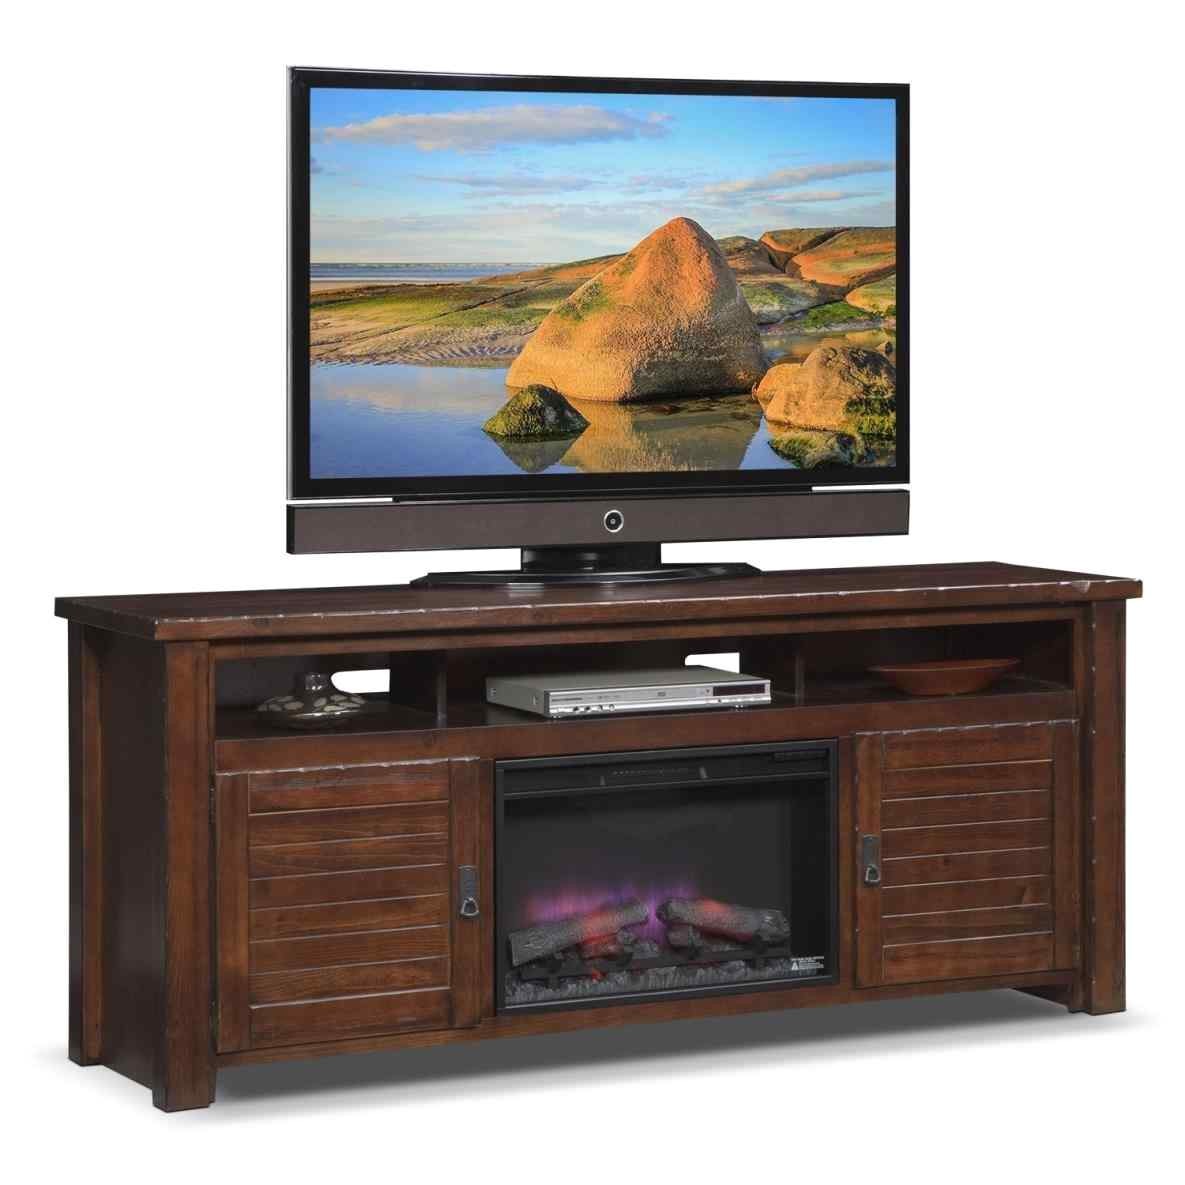 american furniture tv stands black large tv stand with electric fireplace unit by furniture american warehouse furnitures furniture american furniture tv stands jpg